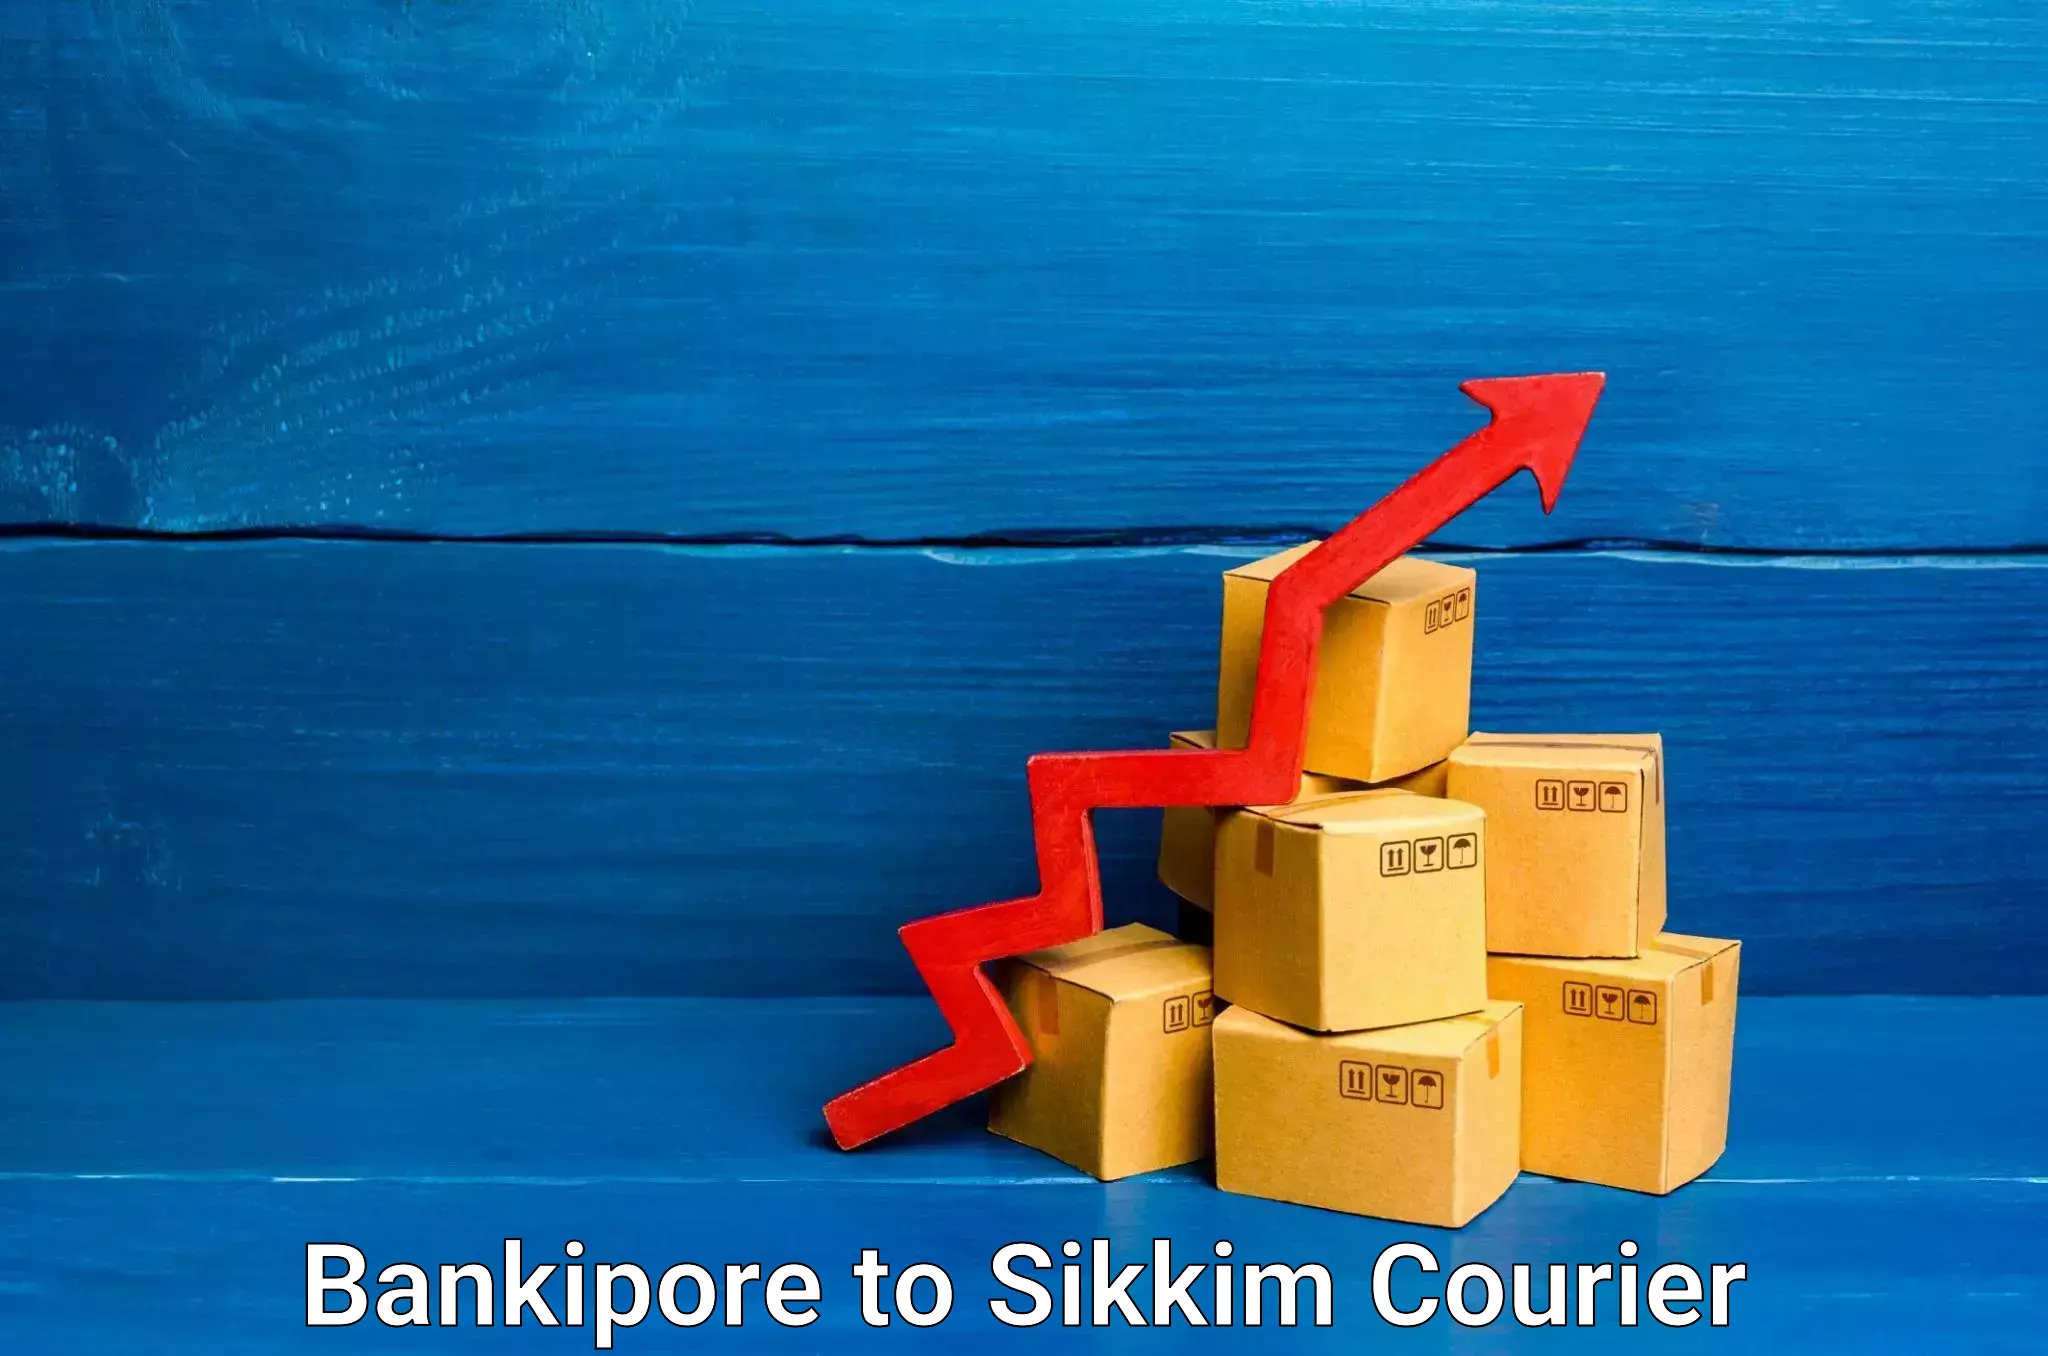 Furniture delivery service Bankipore to Sikkim